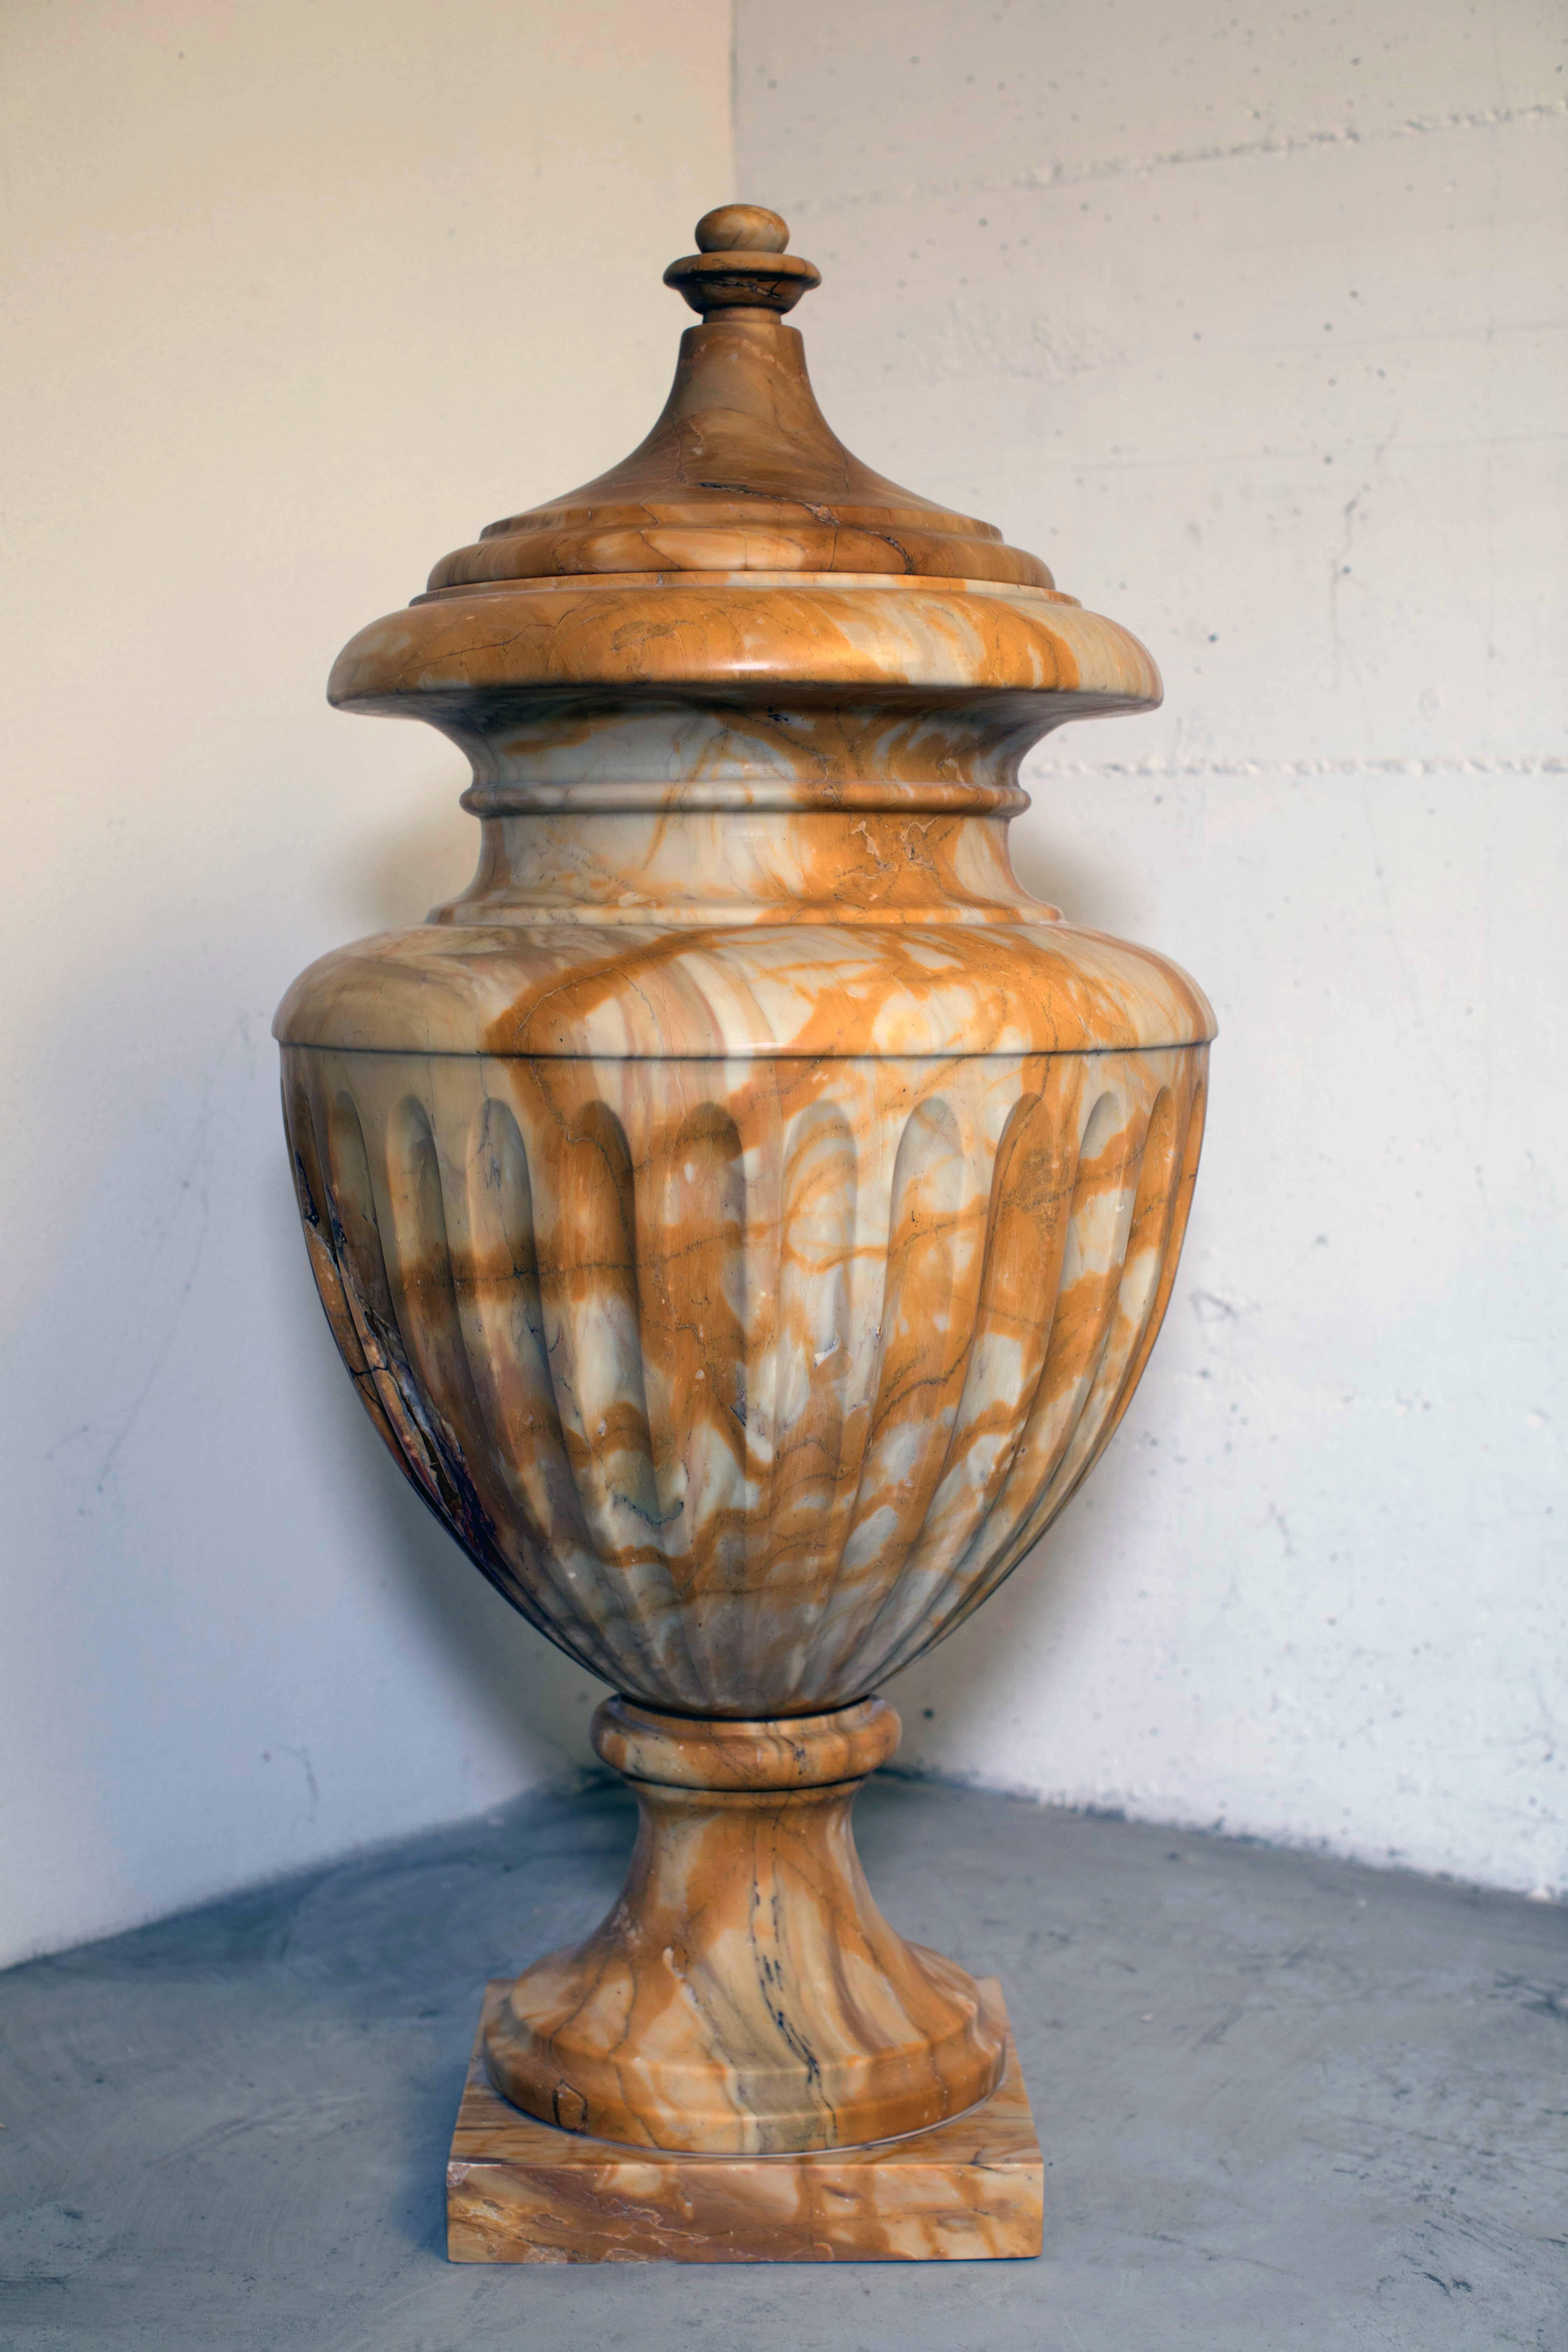 Siena Marble 21st Century Neoclassical Italian Tuscany Siena Yellow Marble Decorative Vase For Sale